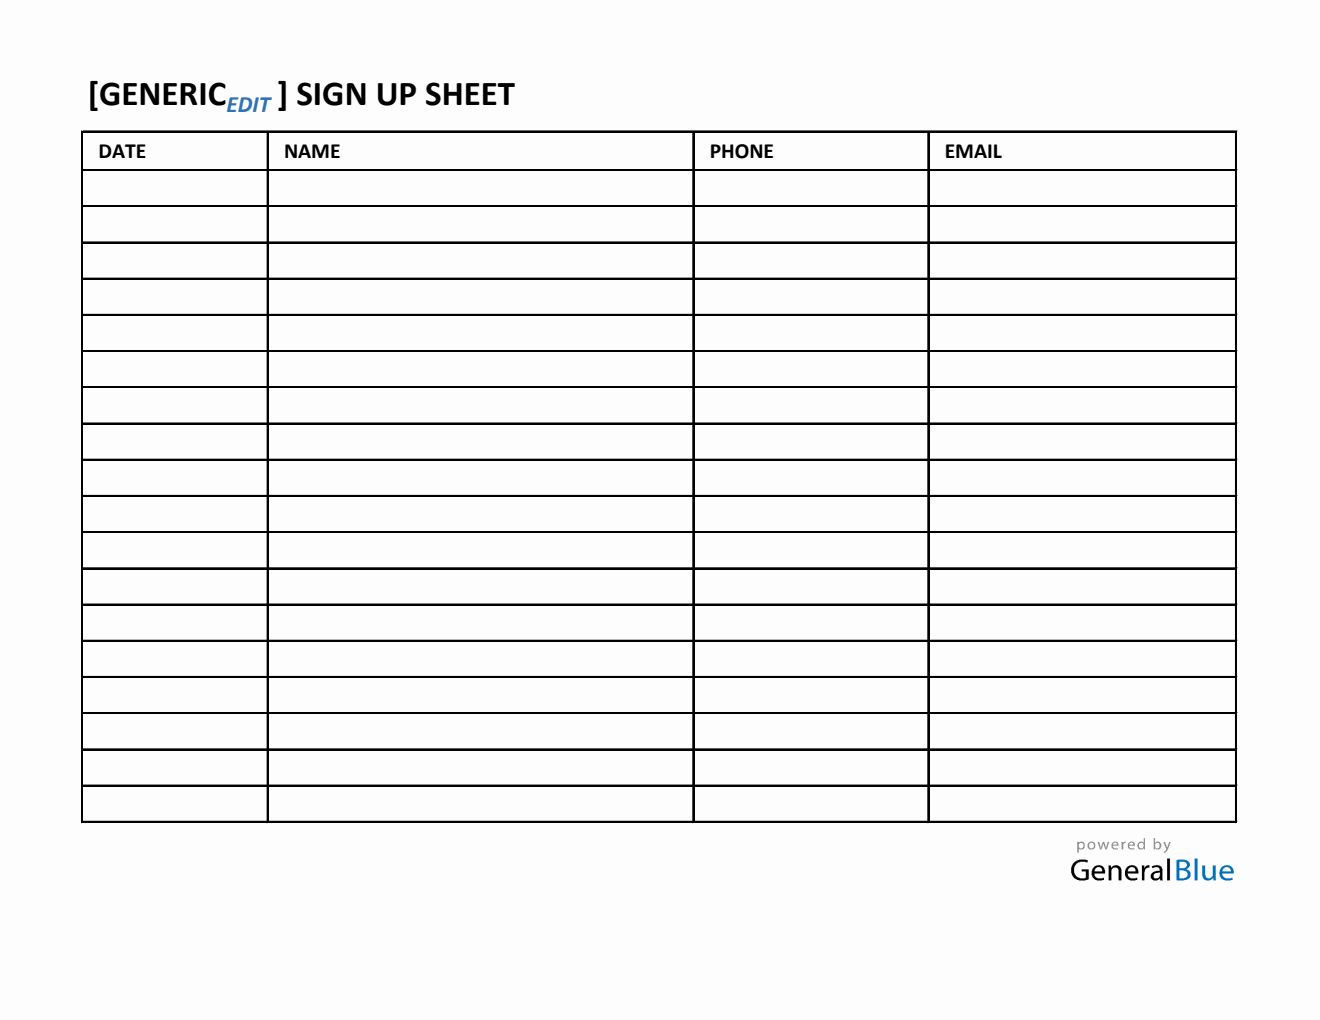 Generic Sign-Up Sheet in Excel